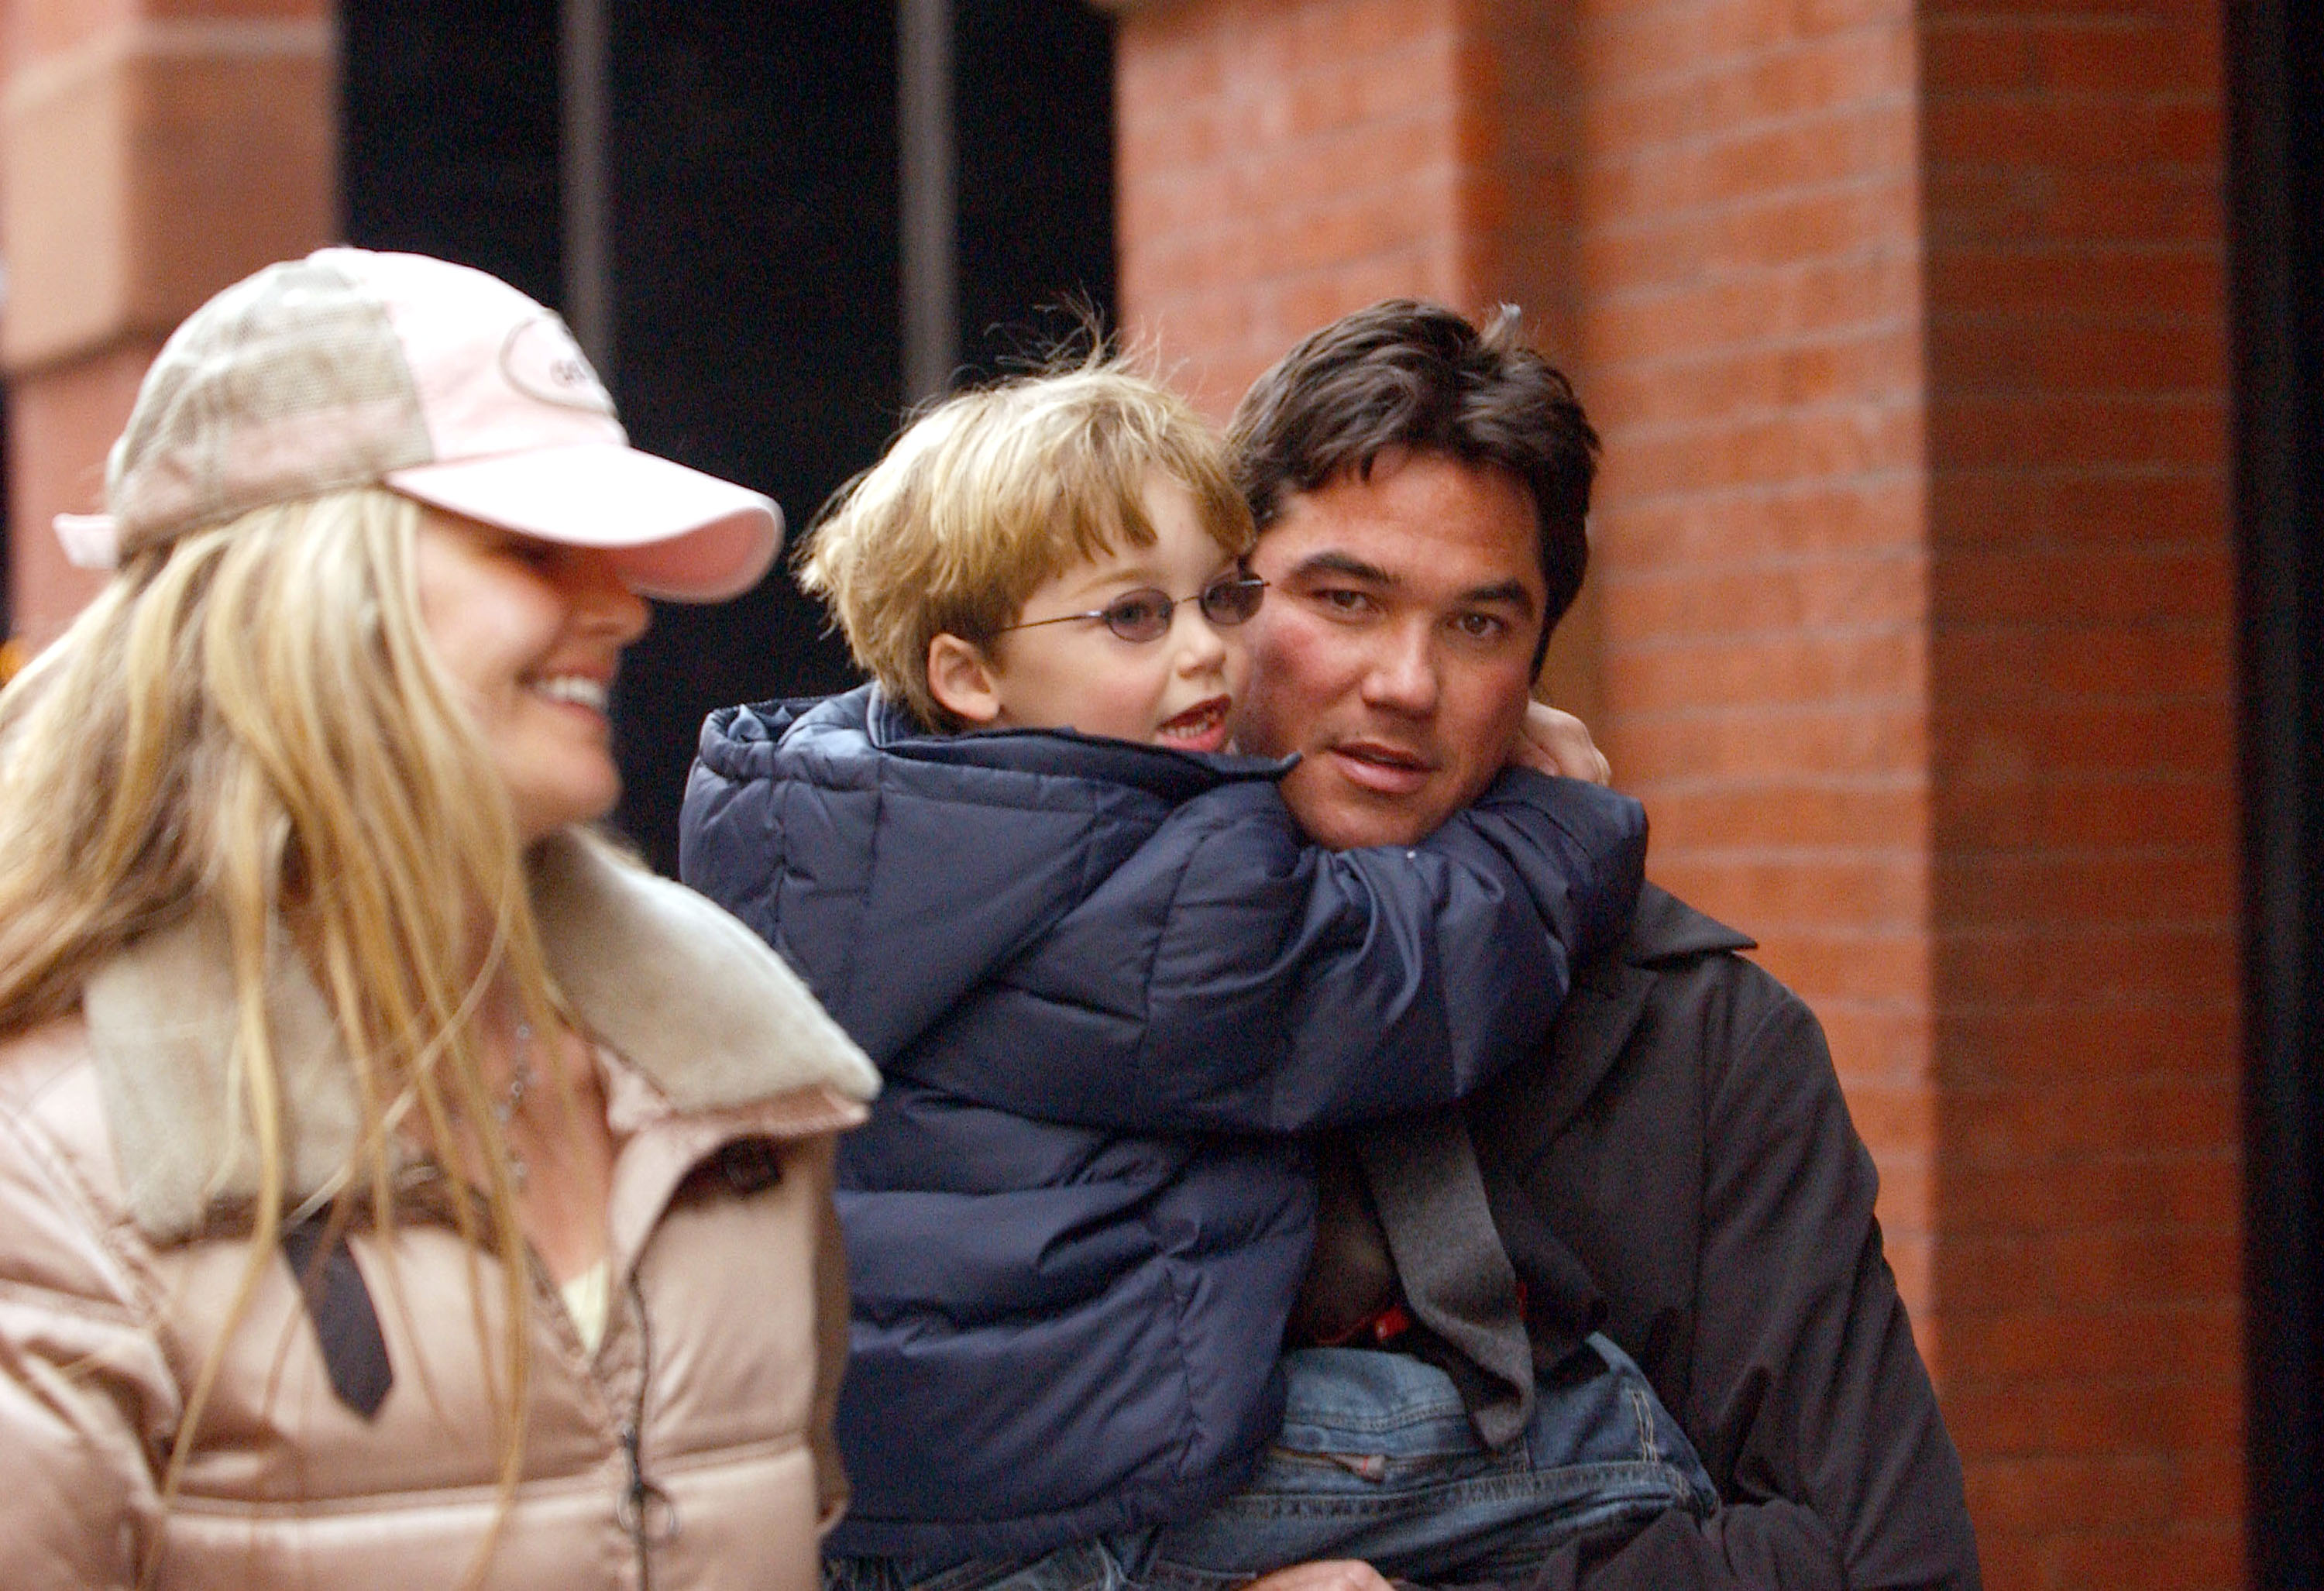 Samantha Torres, Dean Cain, and their son Christopher Cain out for a walk in the West Village, New York City on March 17, 2005 | Source: Getty Images